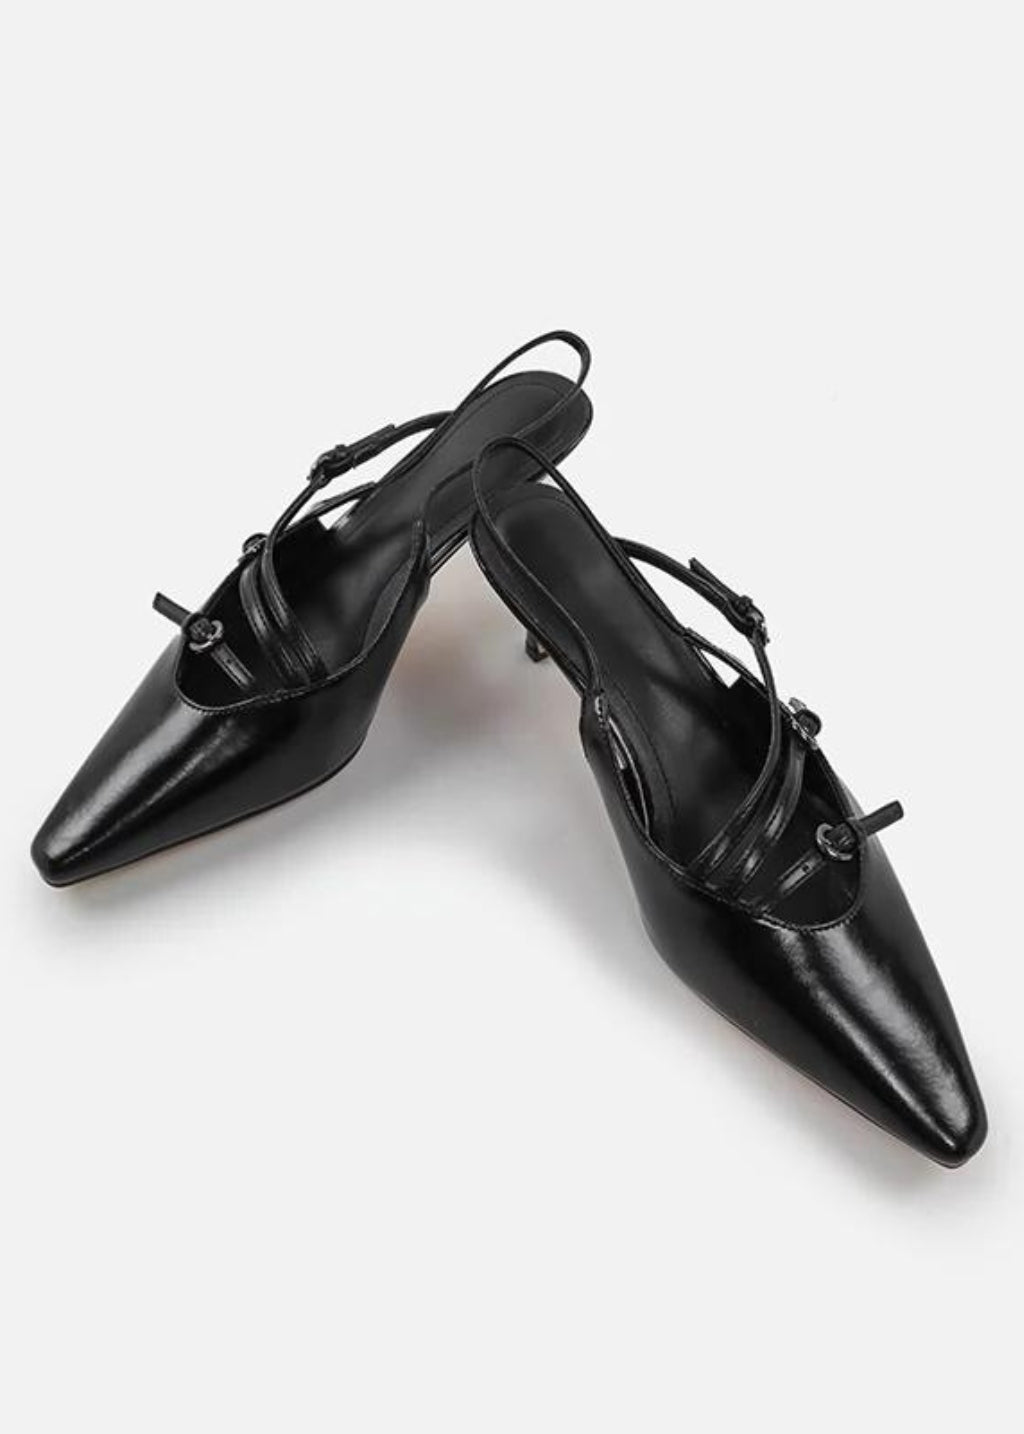 Black Pointed -Toe Patent leather Pumps